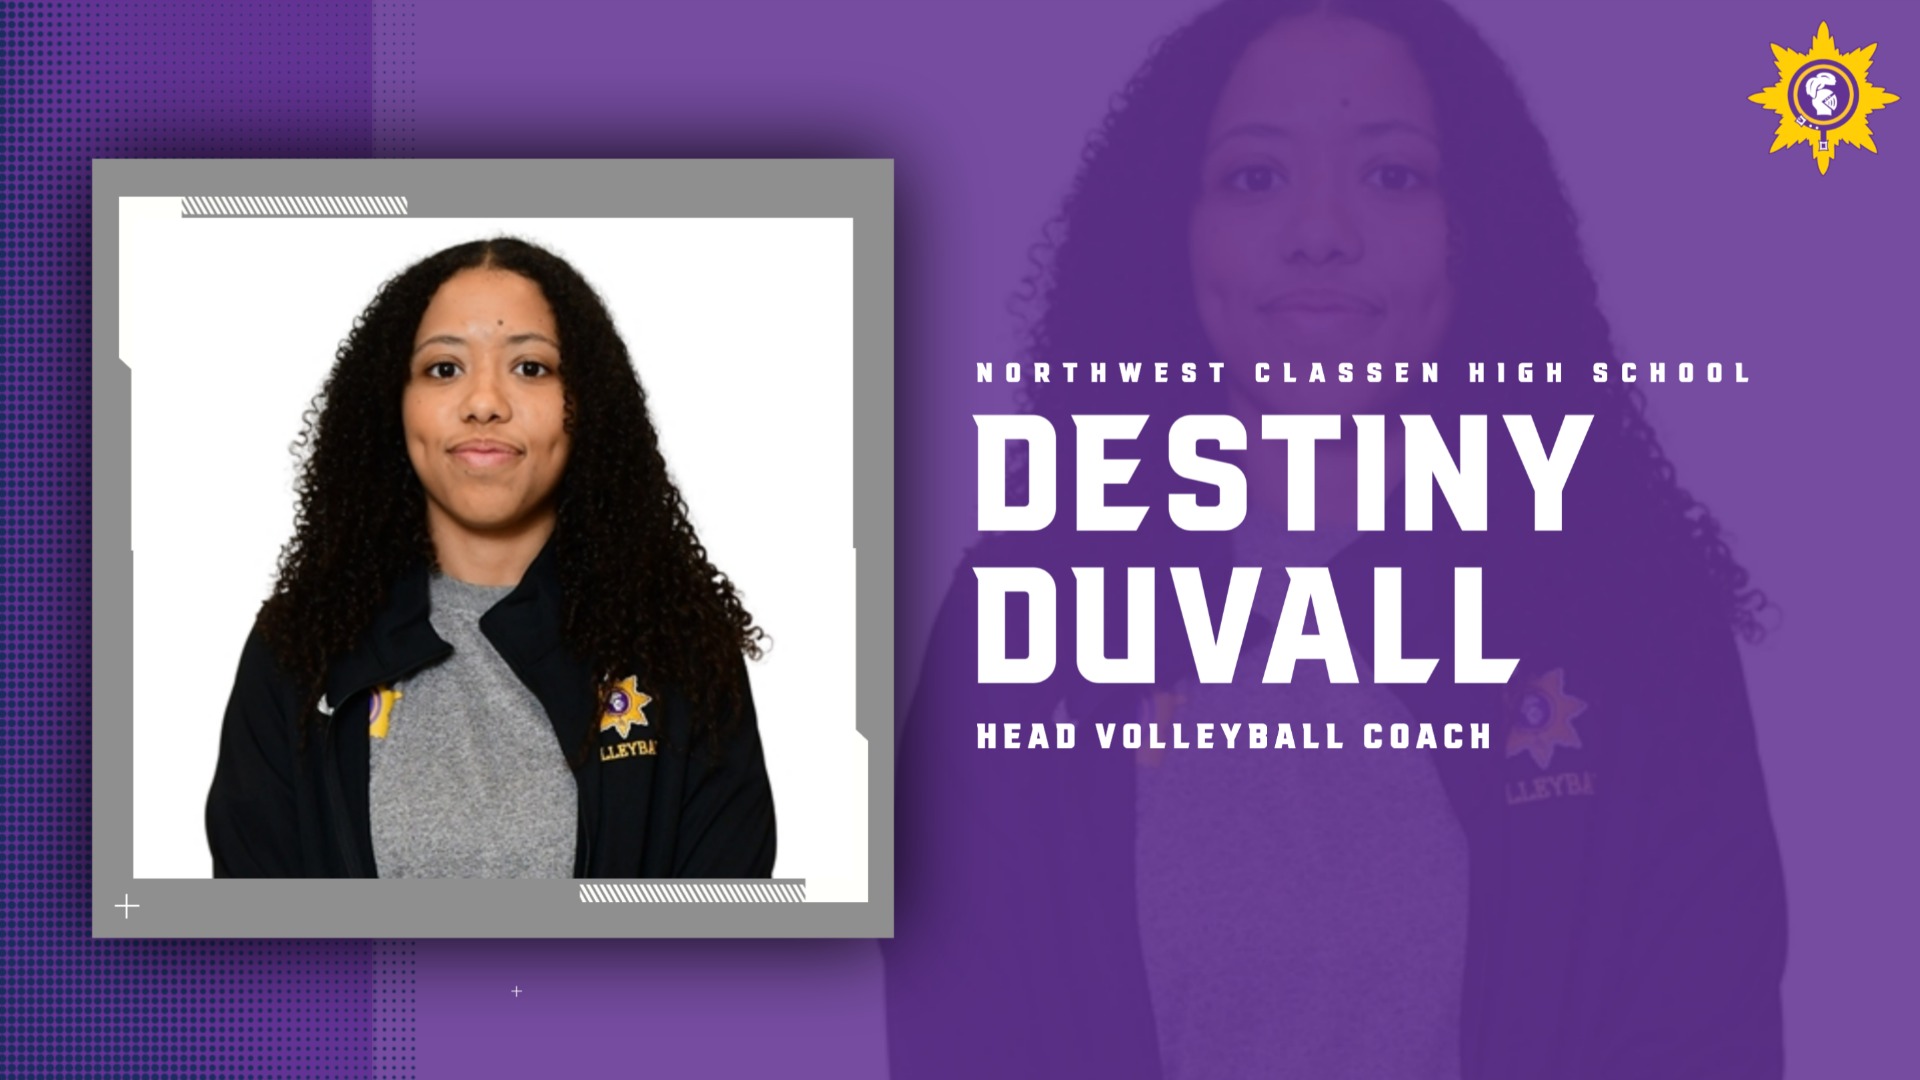 Slide 4 - Northwest Classen Promotes Destiny Duvall to Head Coach for their Volleyball program